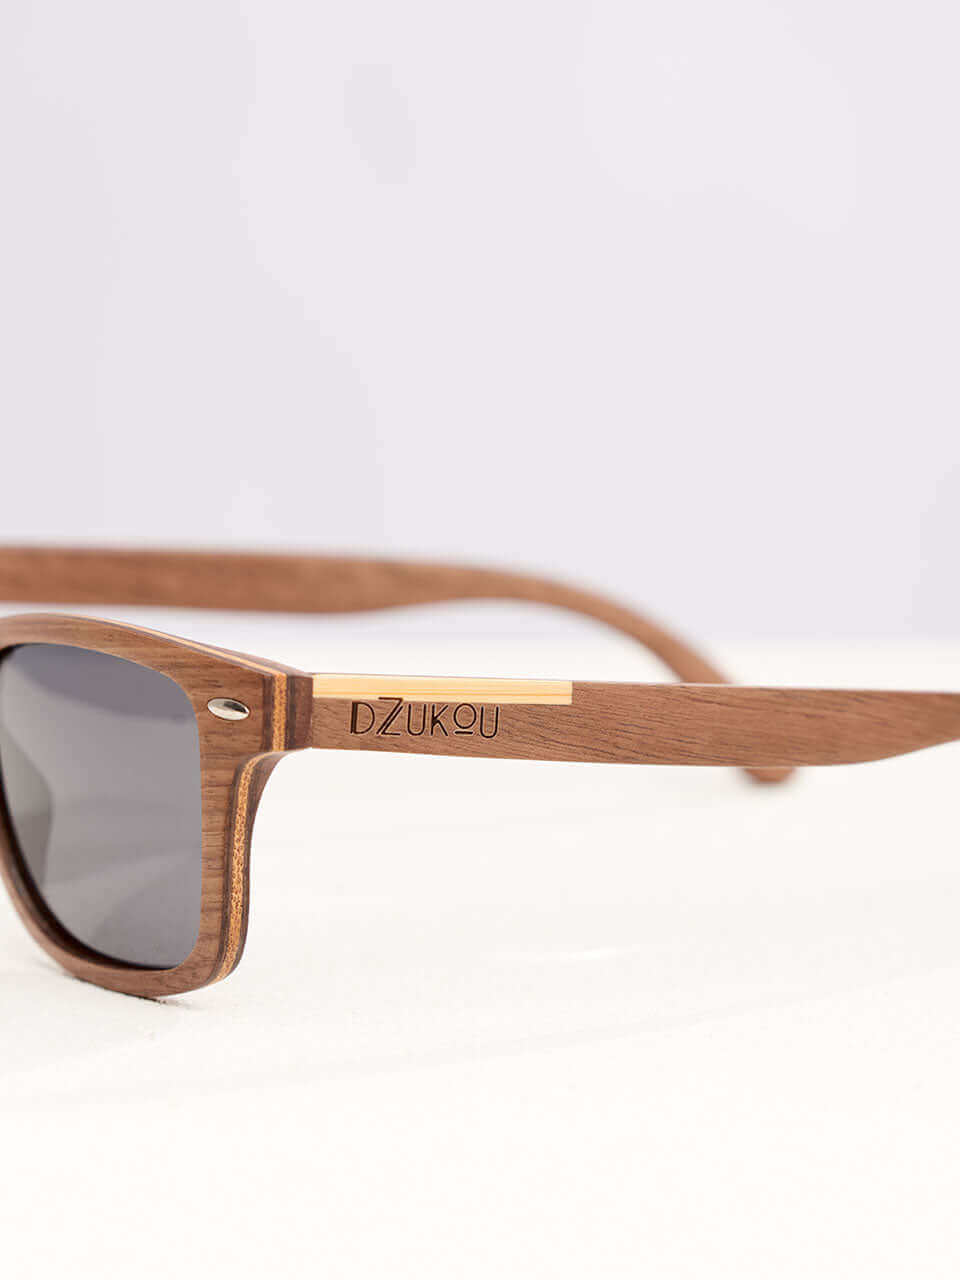 side view of a wooden sunglasses